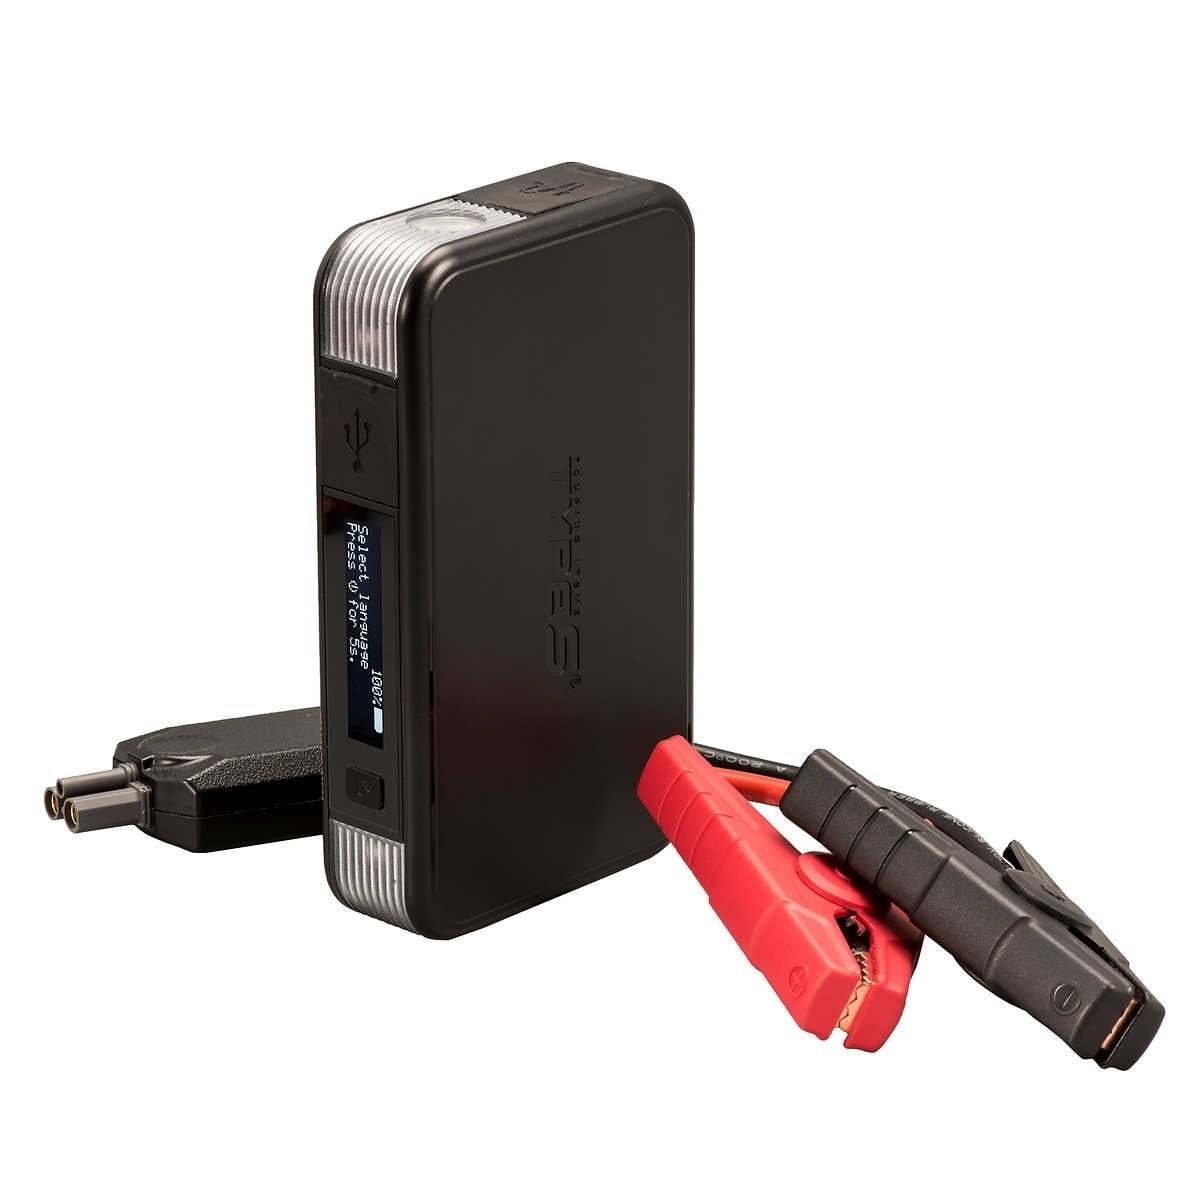 TYPE S 12V 6.0L JUMP STARTER & POWER BANK WITH JUMP GUIDE (GEN 2